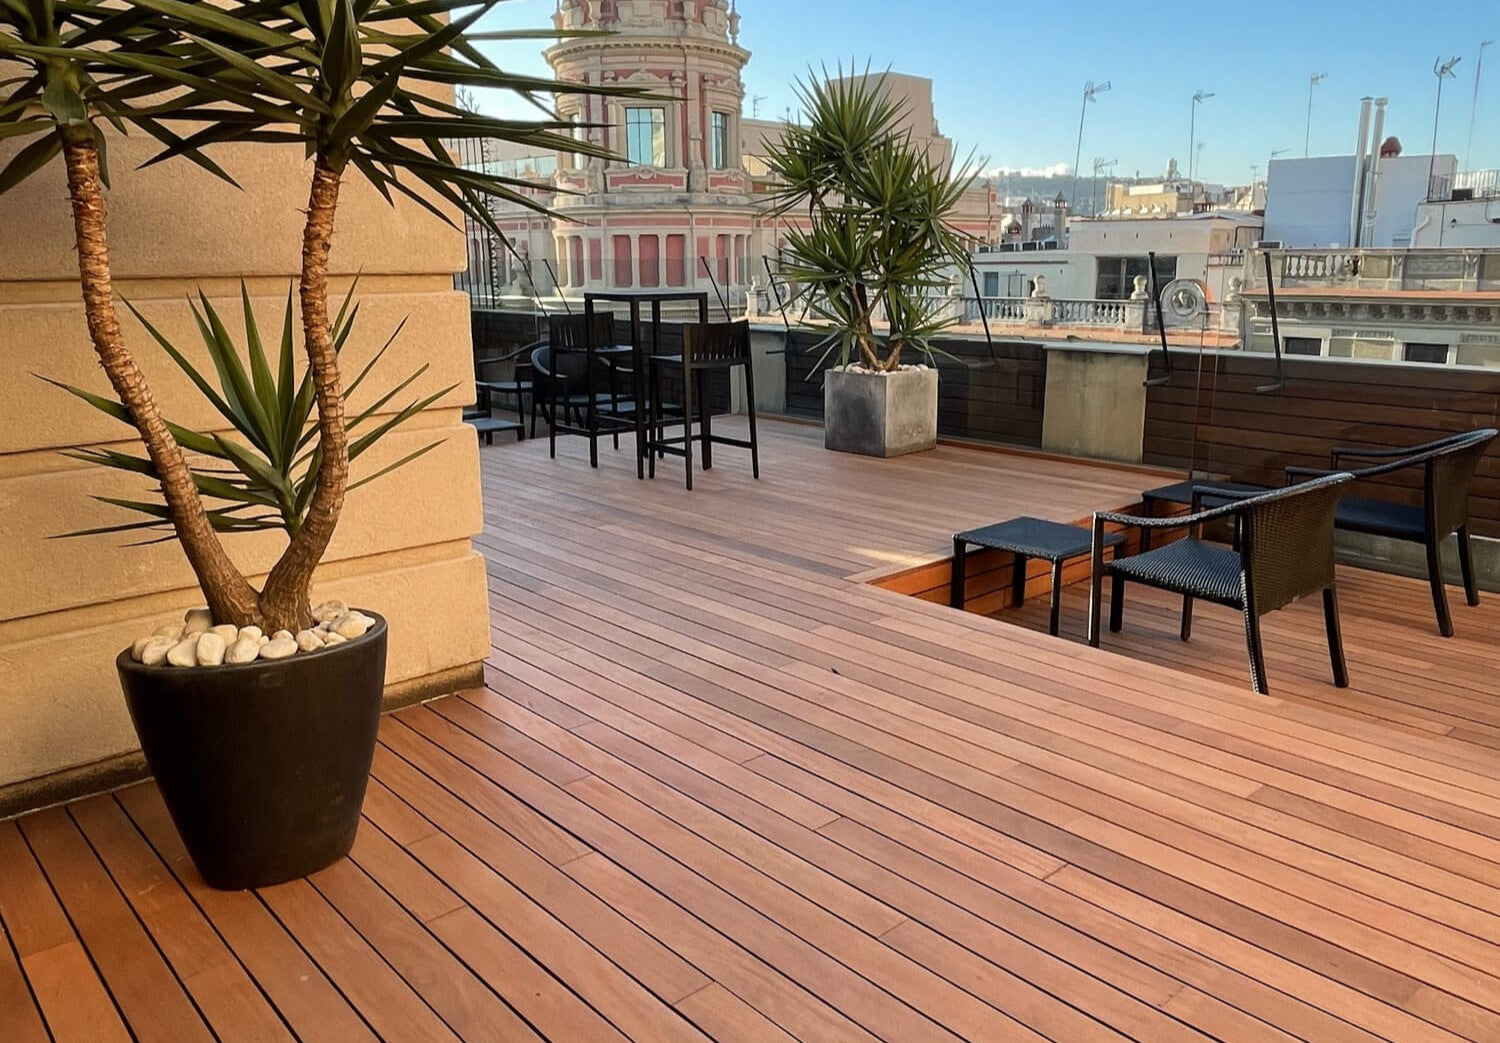 A rooftop terrace with wood decking finished with an extremely durable exterior wood finish for all exterior wood projects called DuroGrit.